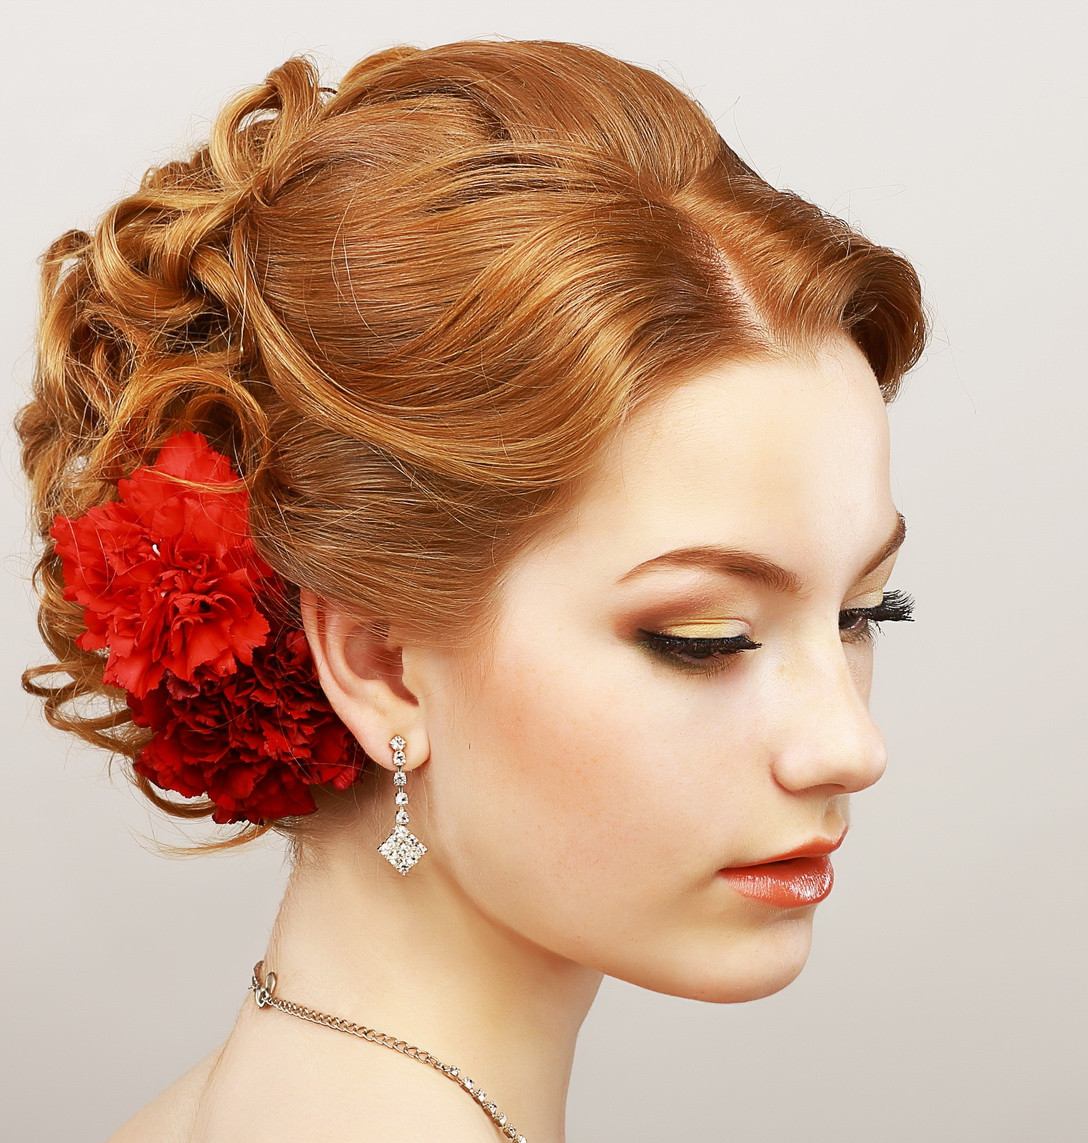 Updo Hairstyles For Prom
 16 Easy Prom Hairstyles for Short and Medium Length Hair